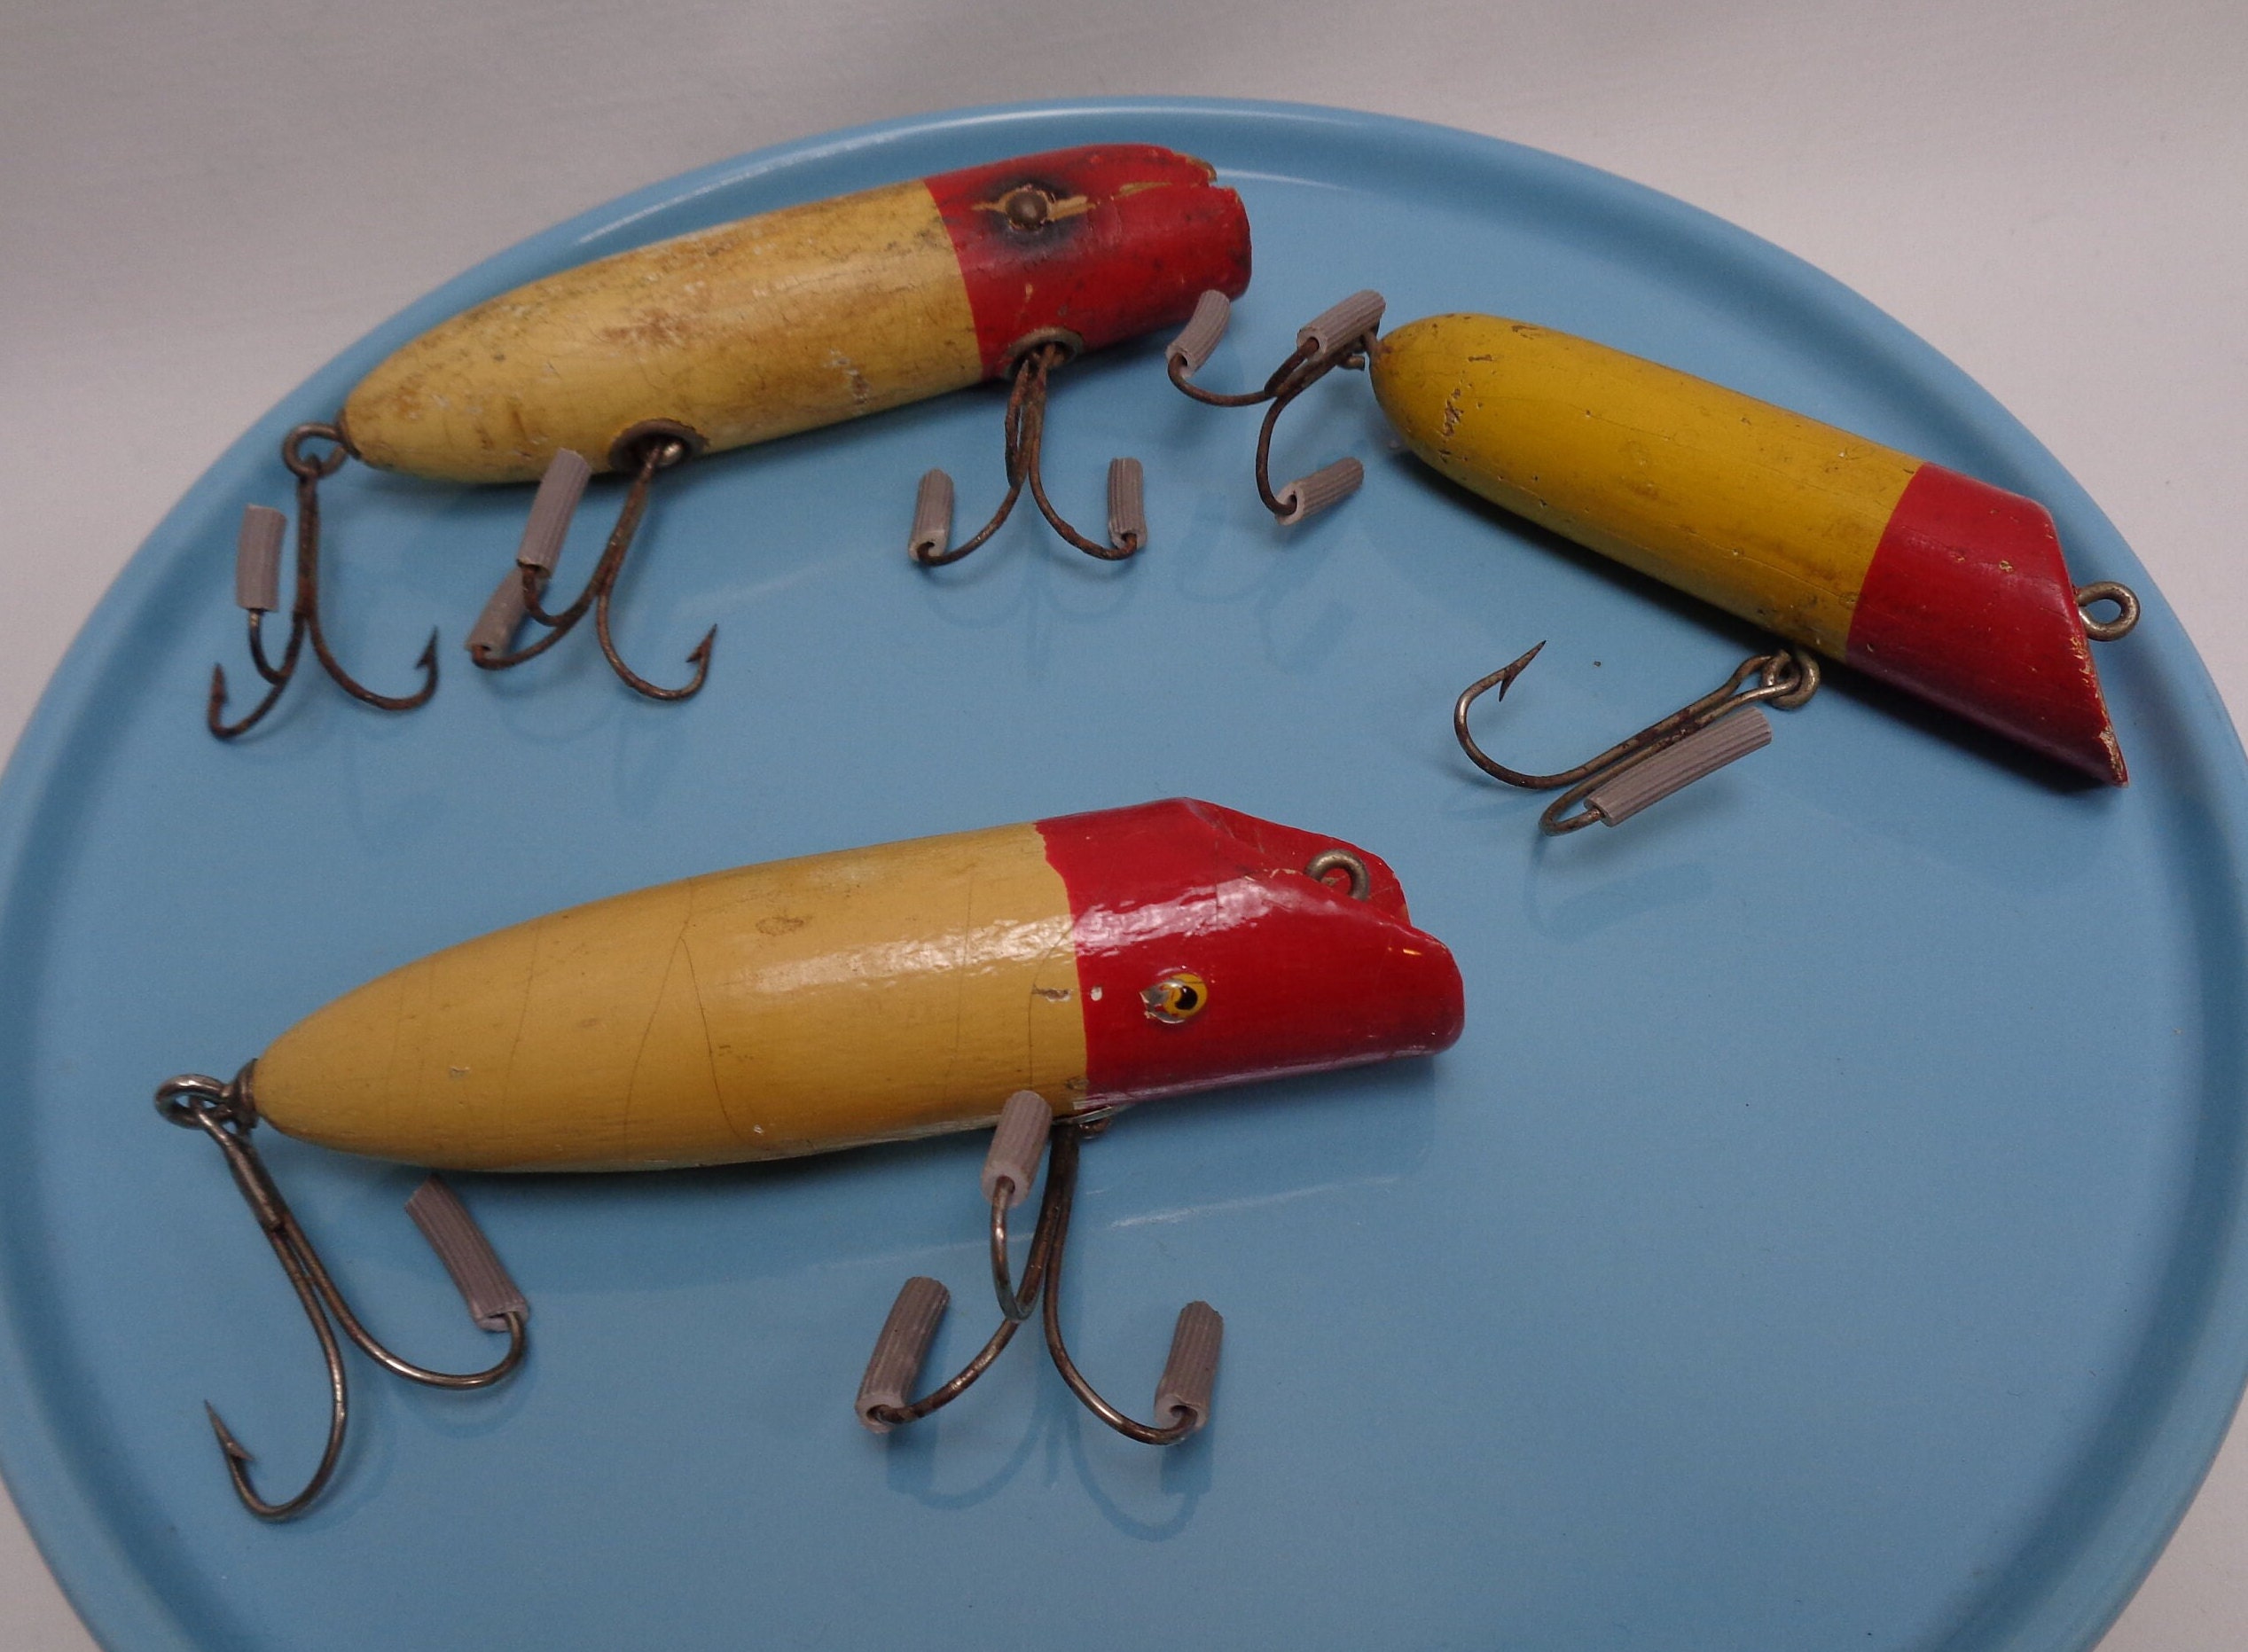 Antique Vintage Wood Fishing Lures, Red and Yellow Wooden Lures, One with  Glass eye, Chub, Set of 3